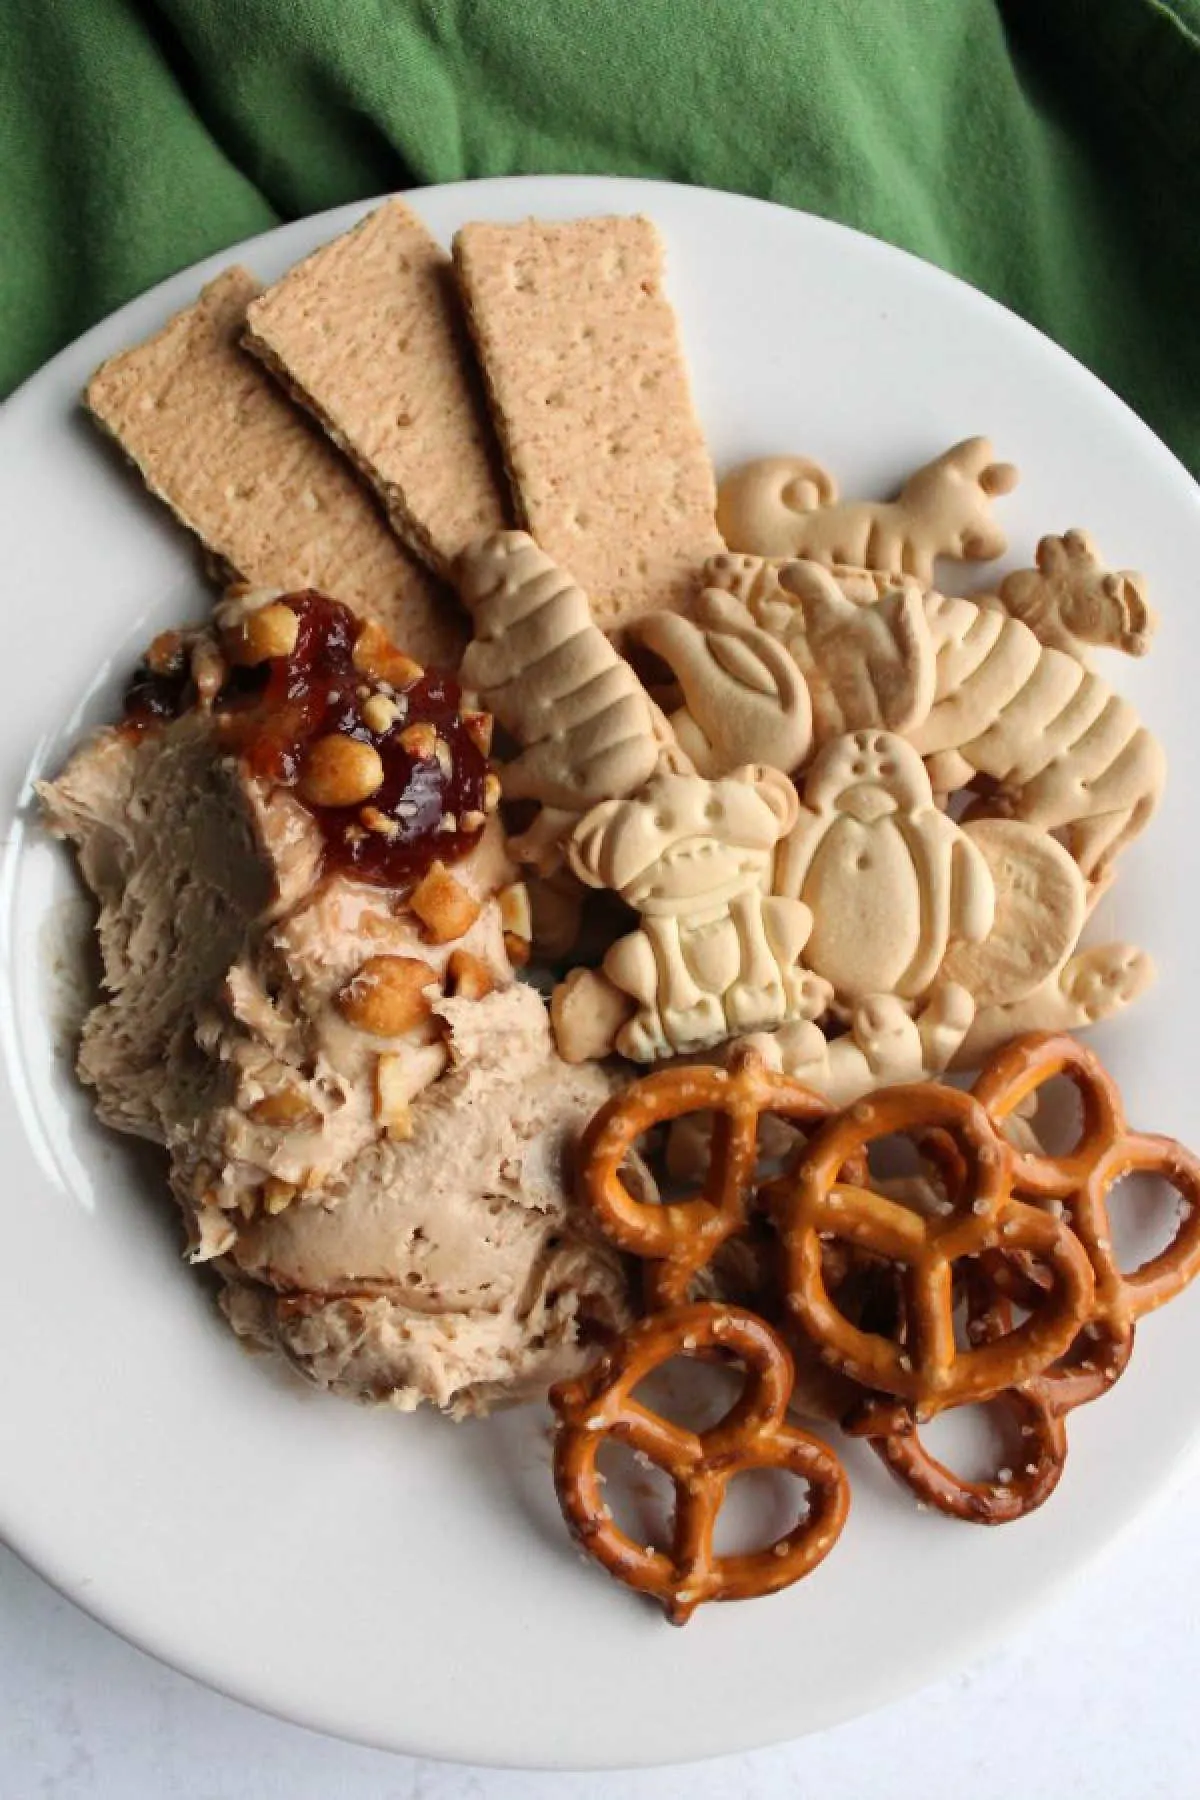 small plate filled with peanut butter and jelly dip, animal crackers, pretzels and graham crackers.